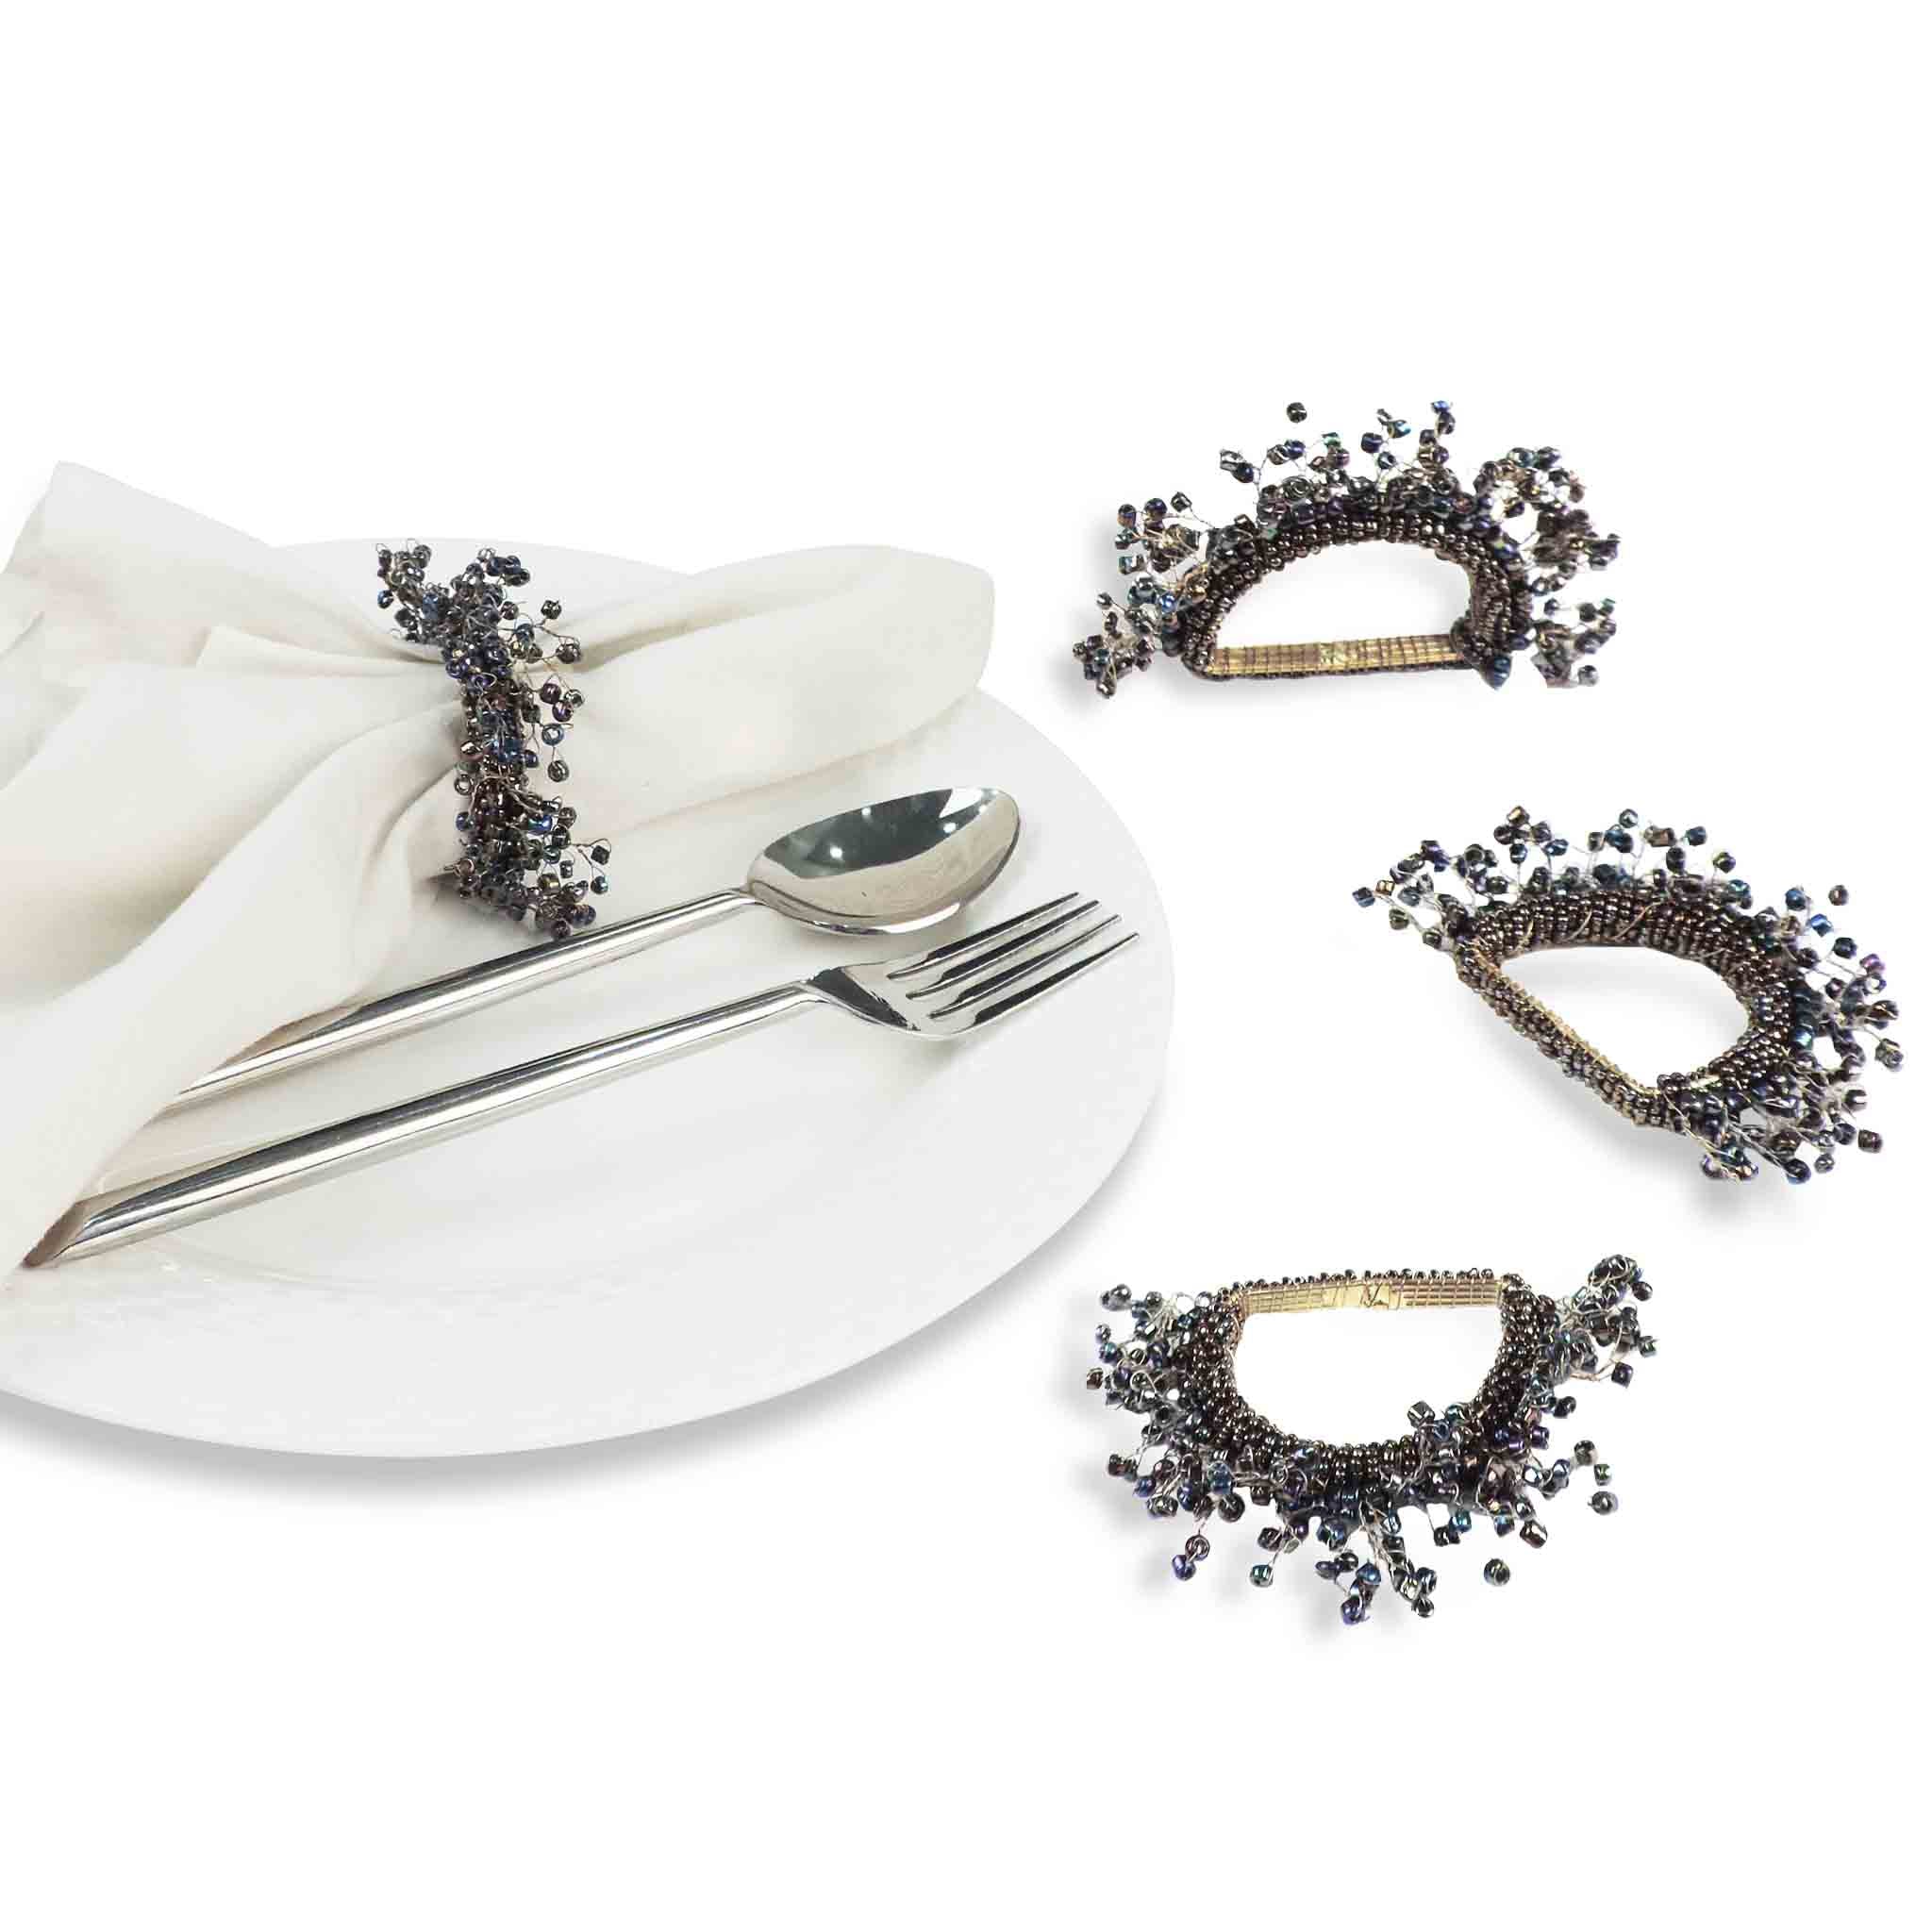 Beaded Shag Napkin Ring<br>Set of 4<br>Color: Peacock